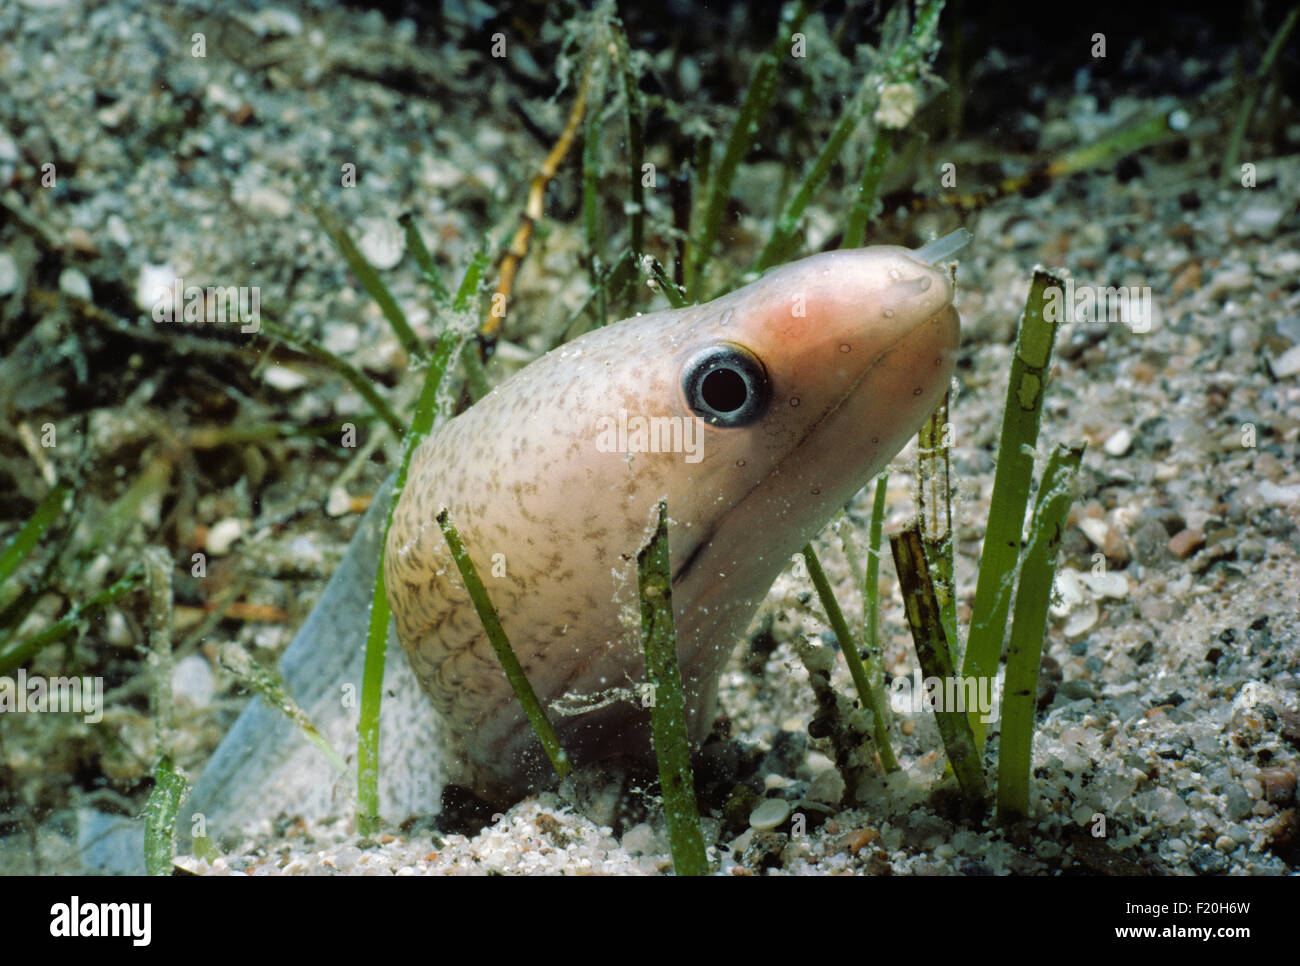 Whitespotted Moray Eel (Gymnothorax punctatus) in eel grass - Red Sea. Stock Photo